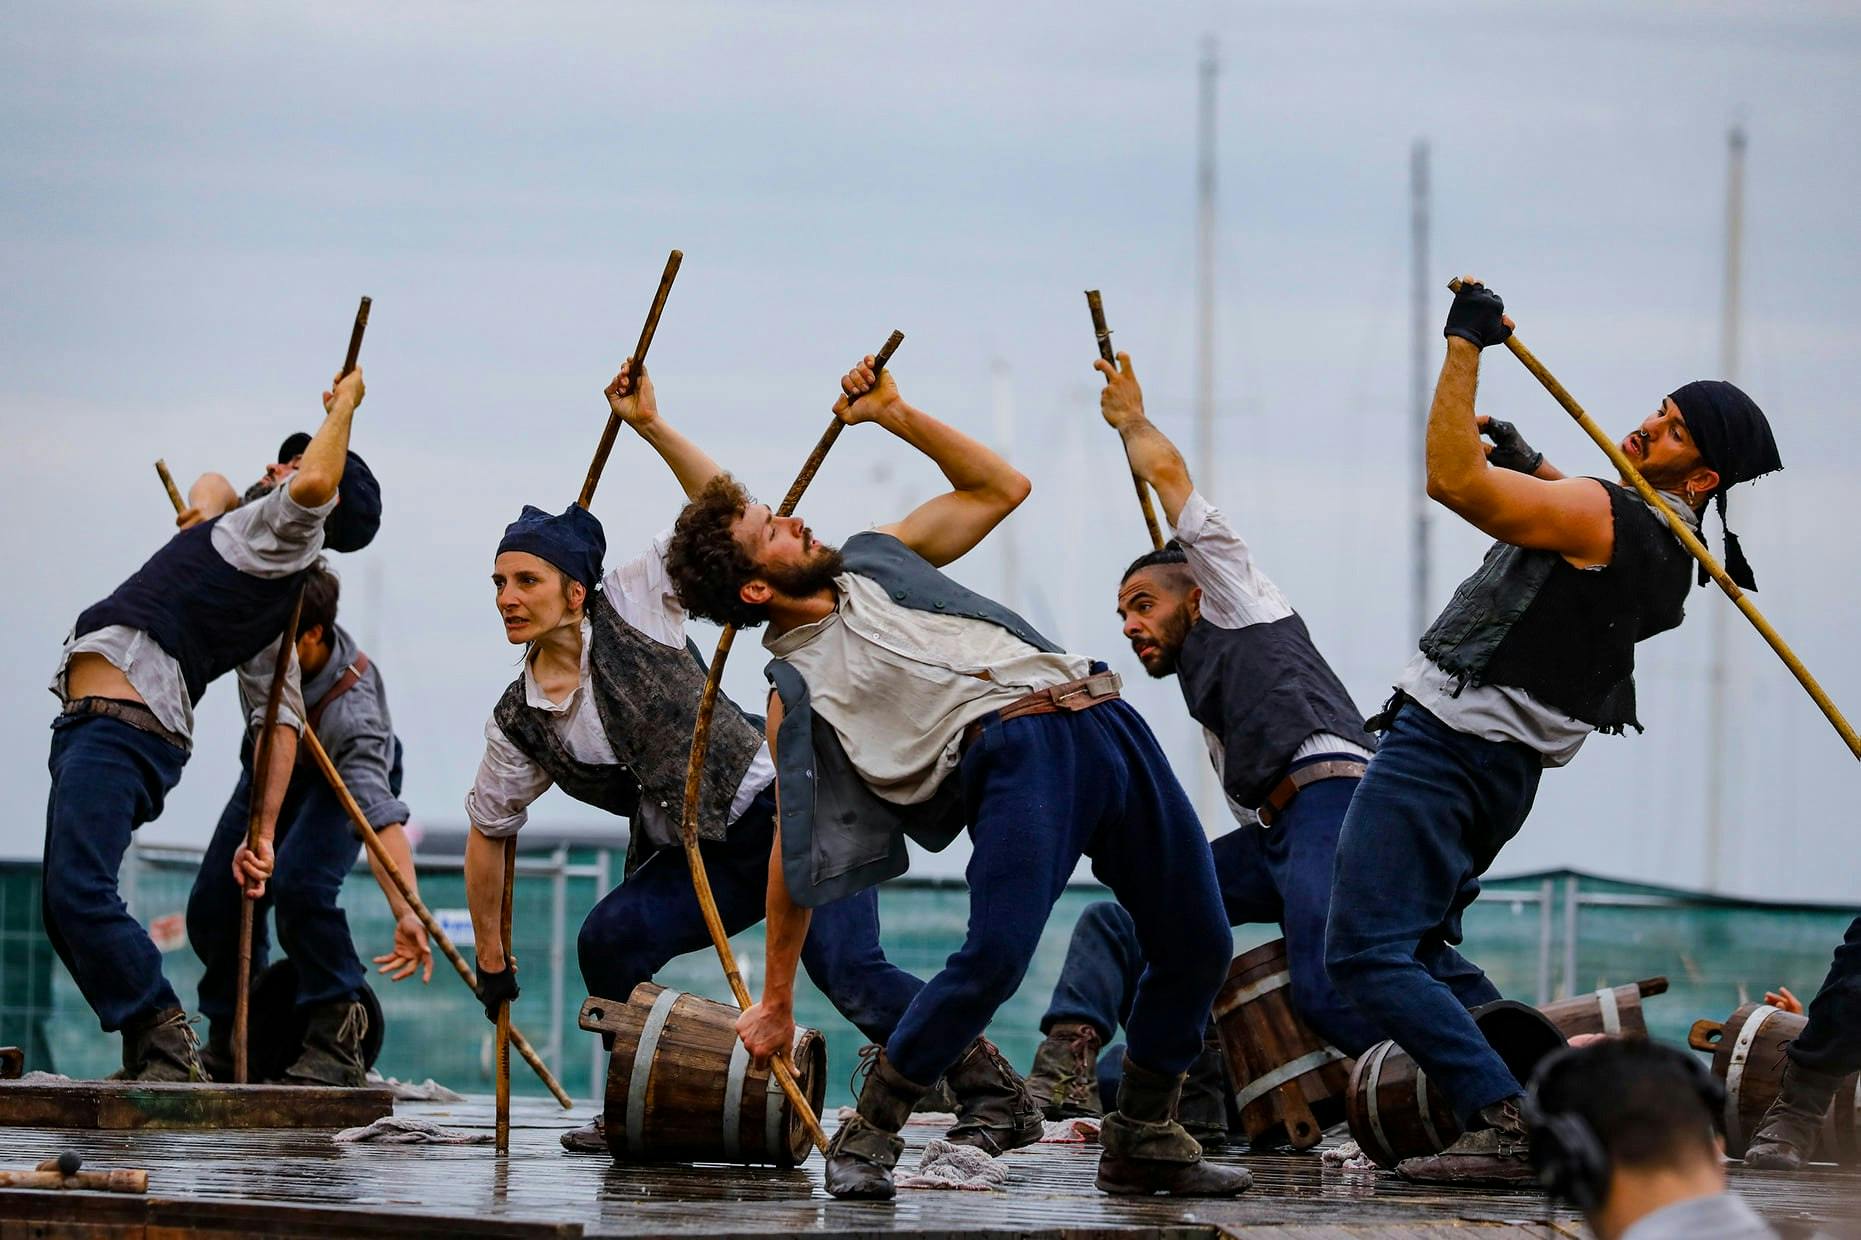 Six dancers dressed as sailors scramble with buckets and sticks in hand